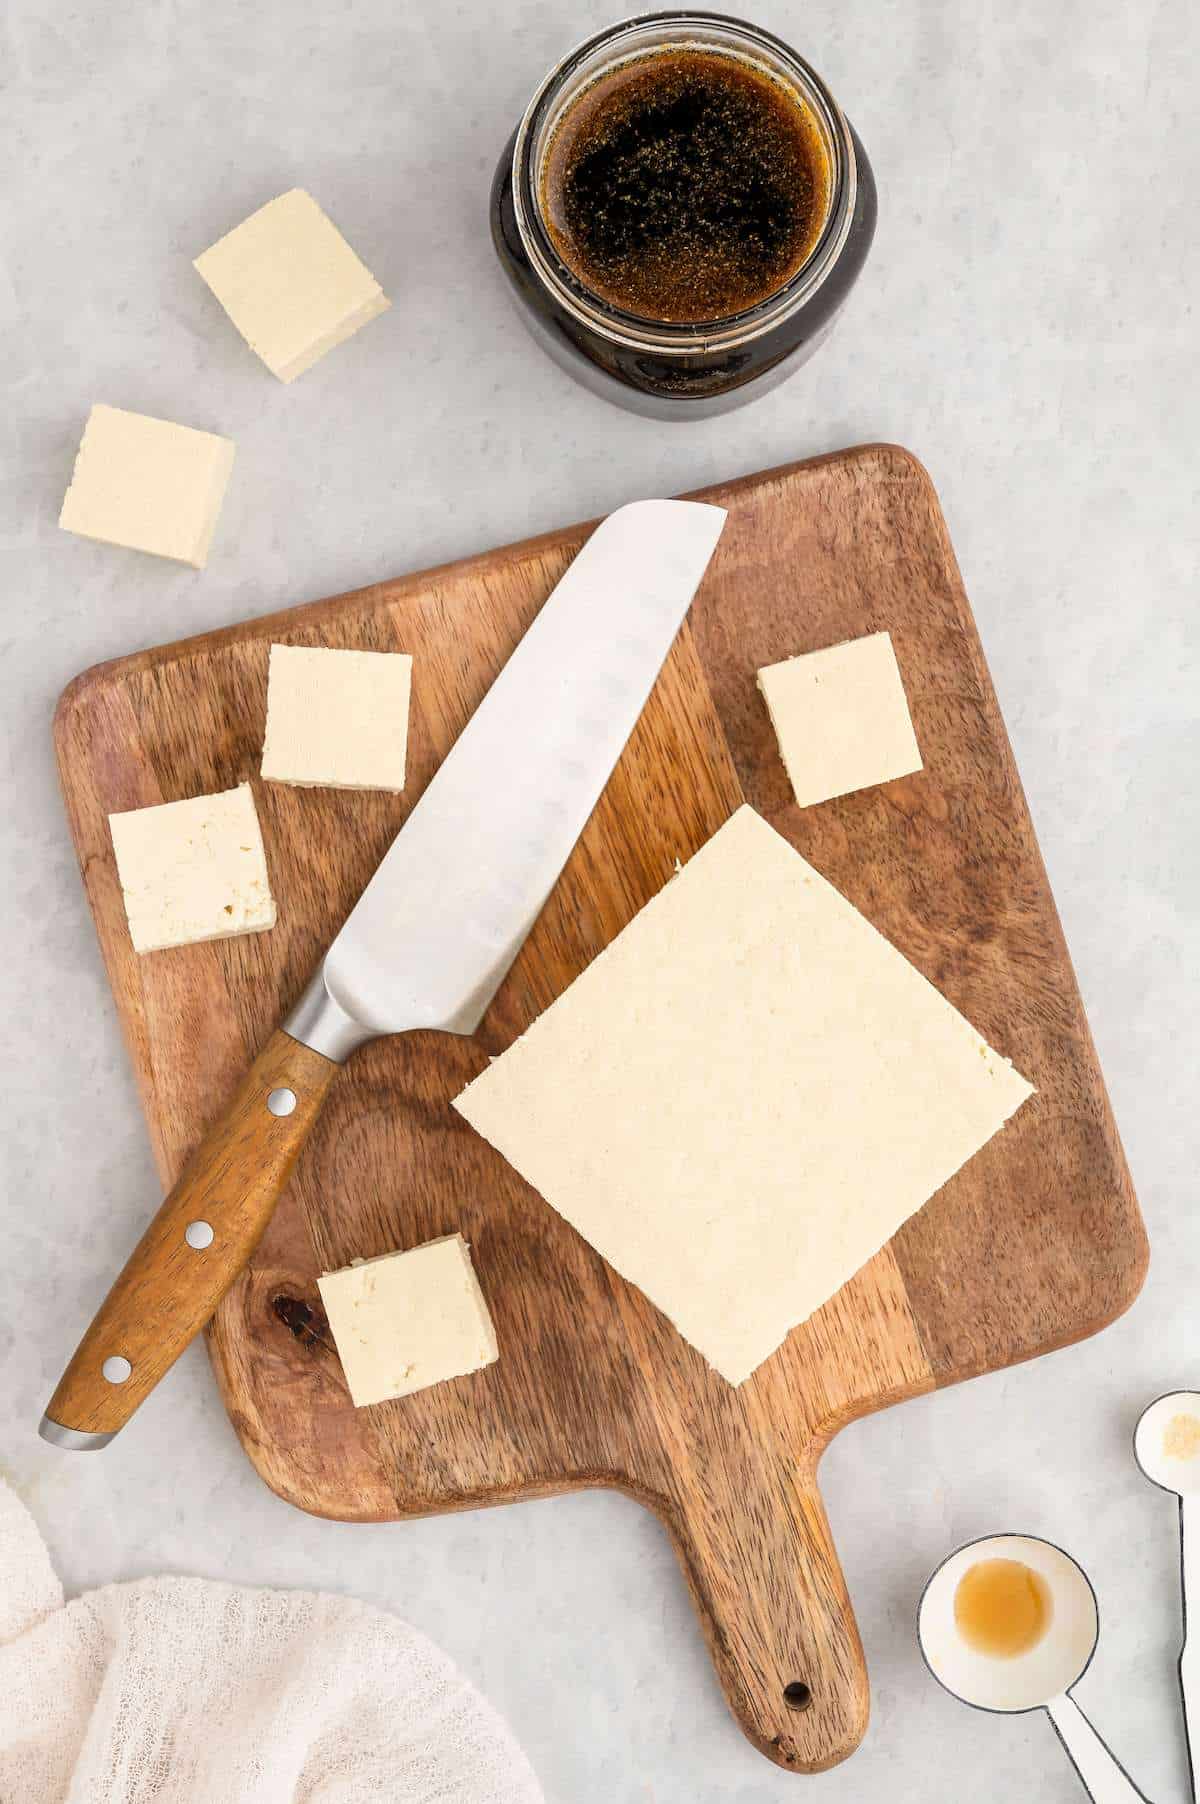 Tofu on a cutting board with a knife, partially sliced into cubes.